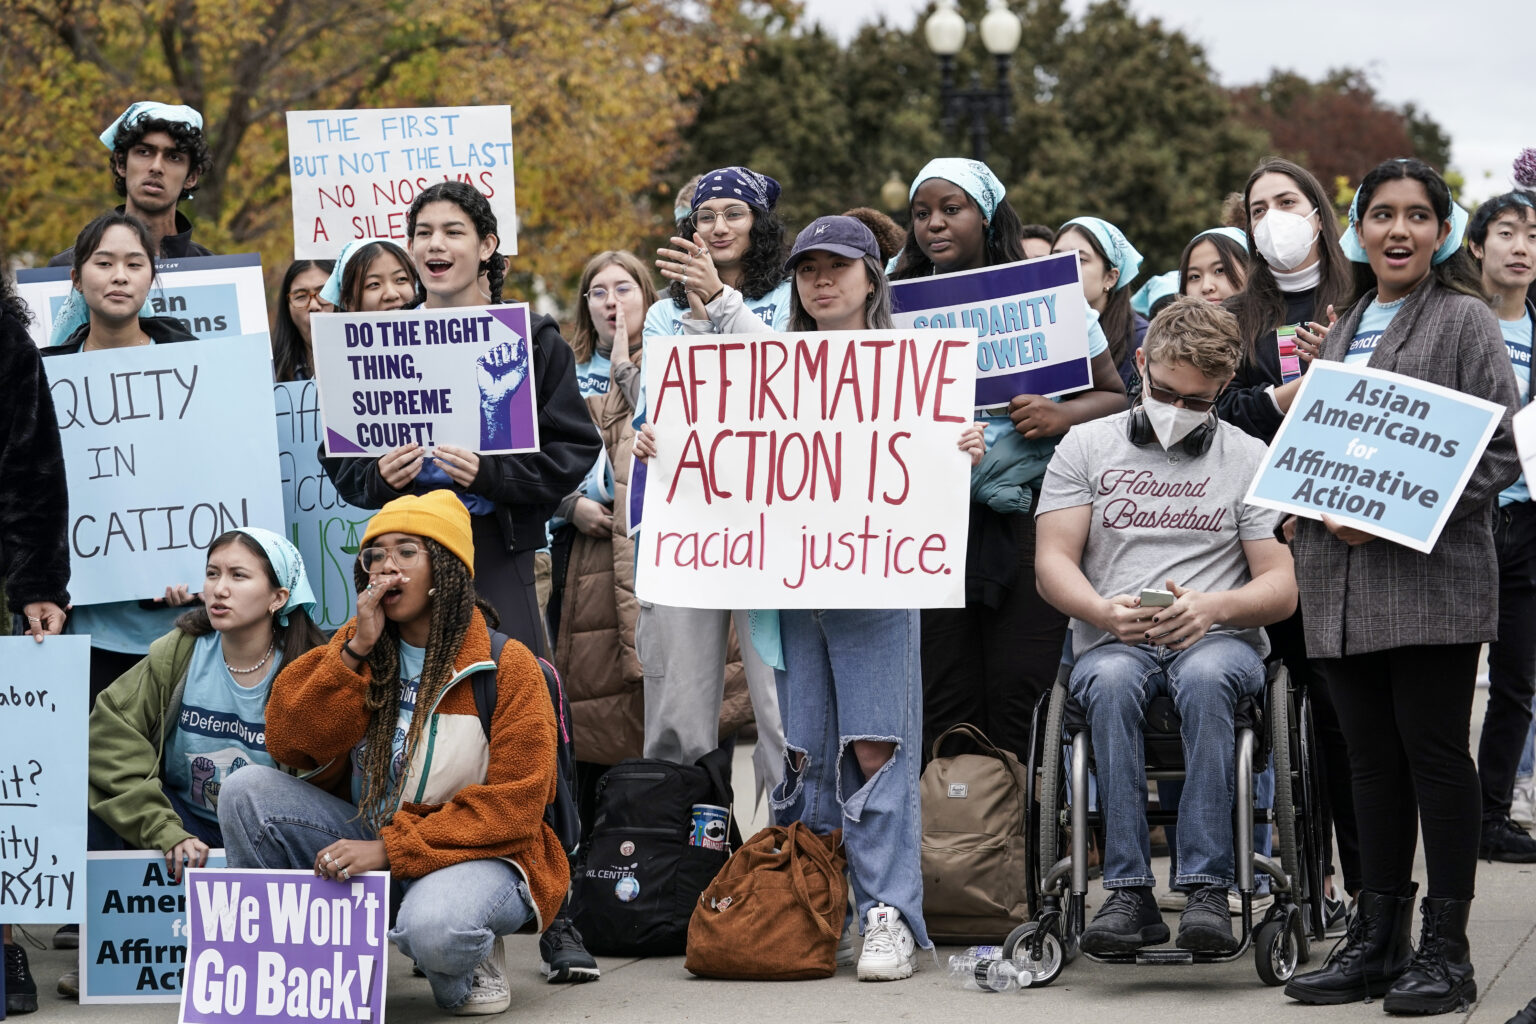 Affirmative Action outlawed by Supreme Court's ruling, 63